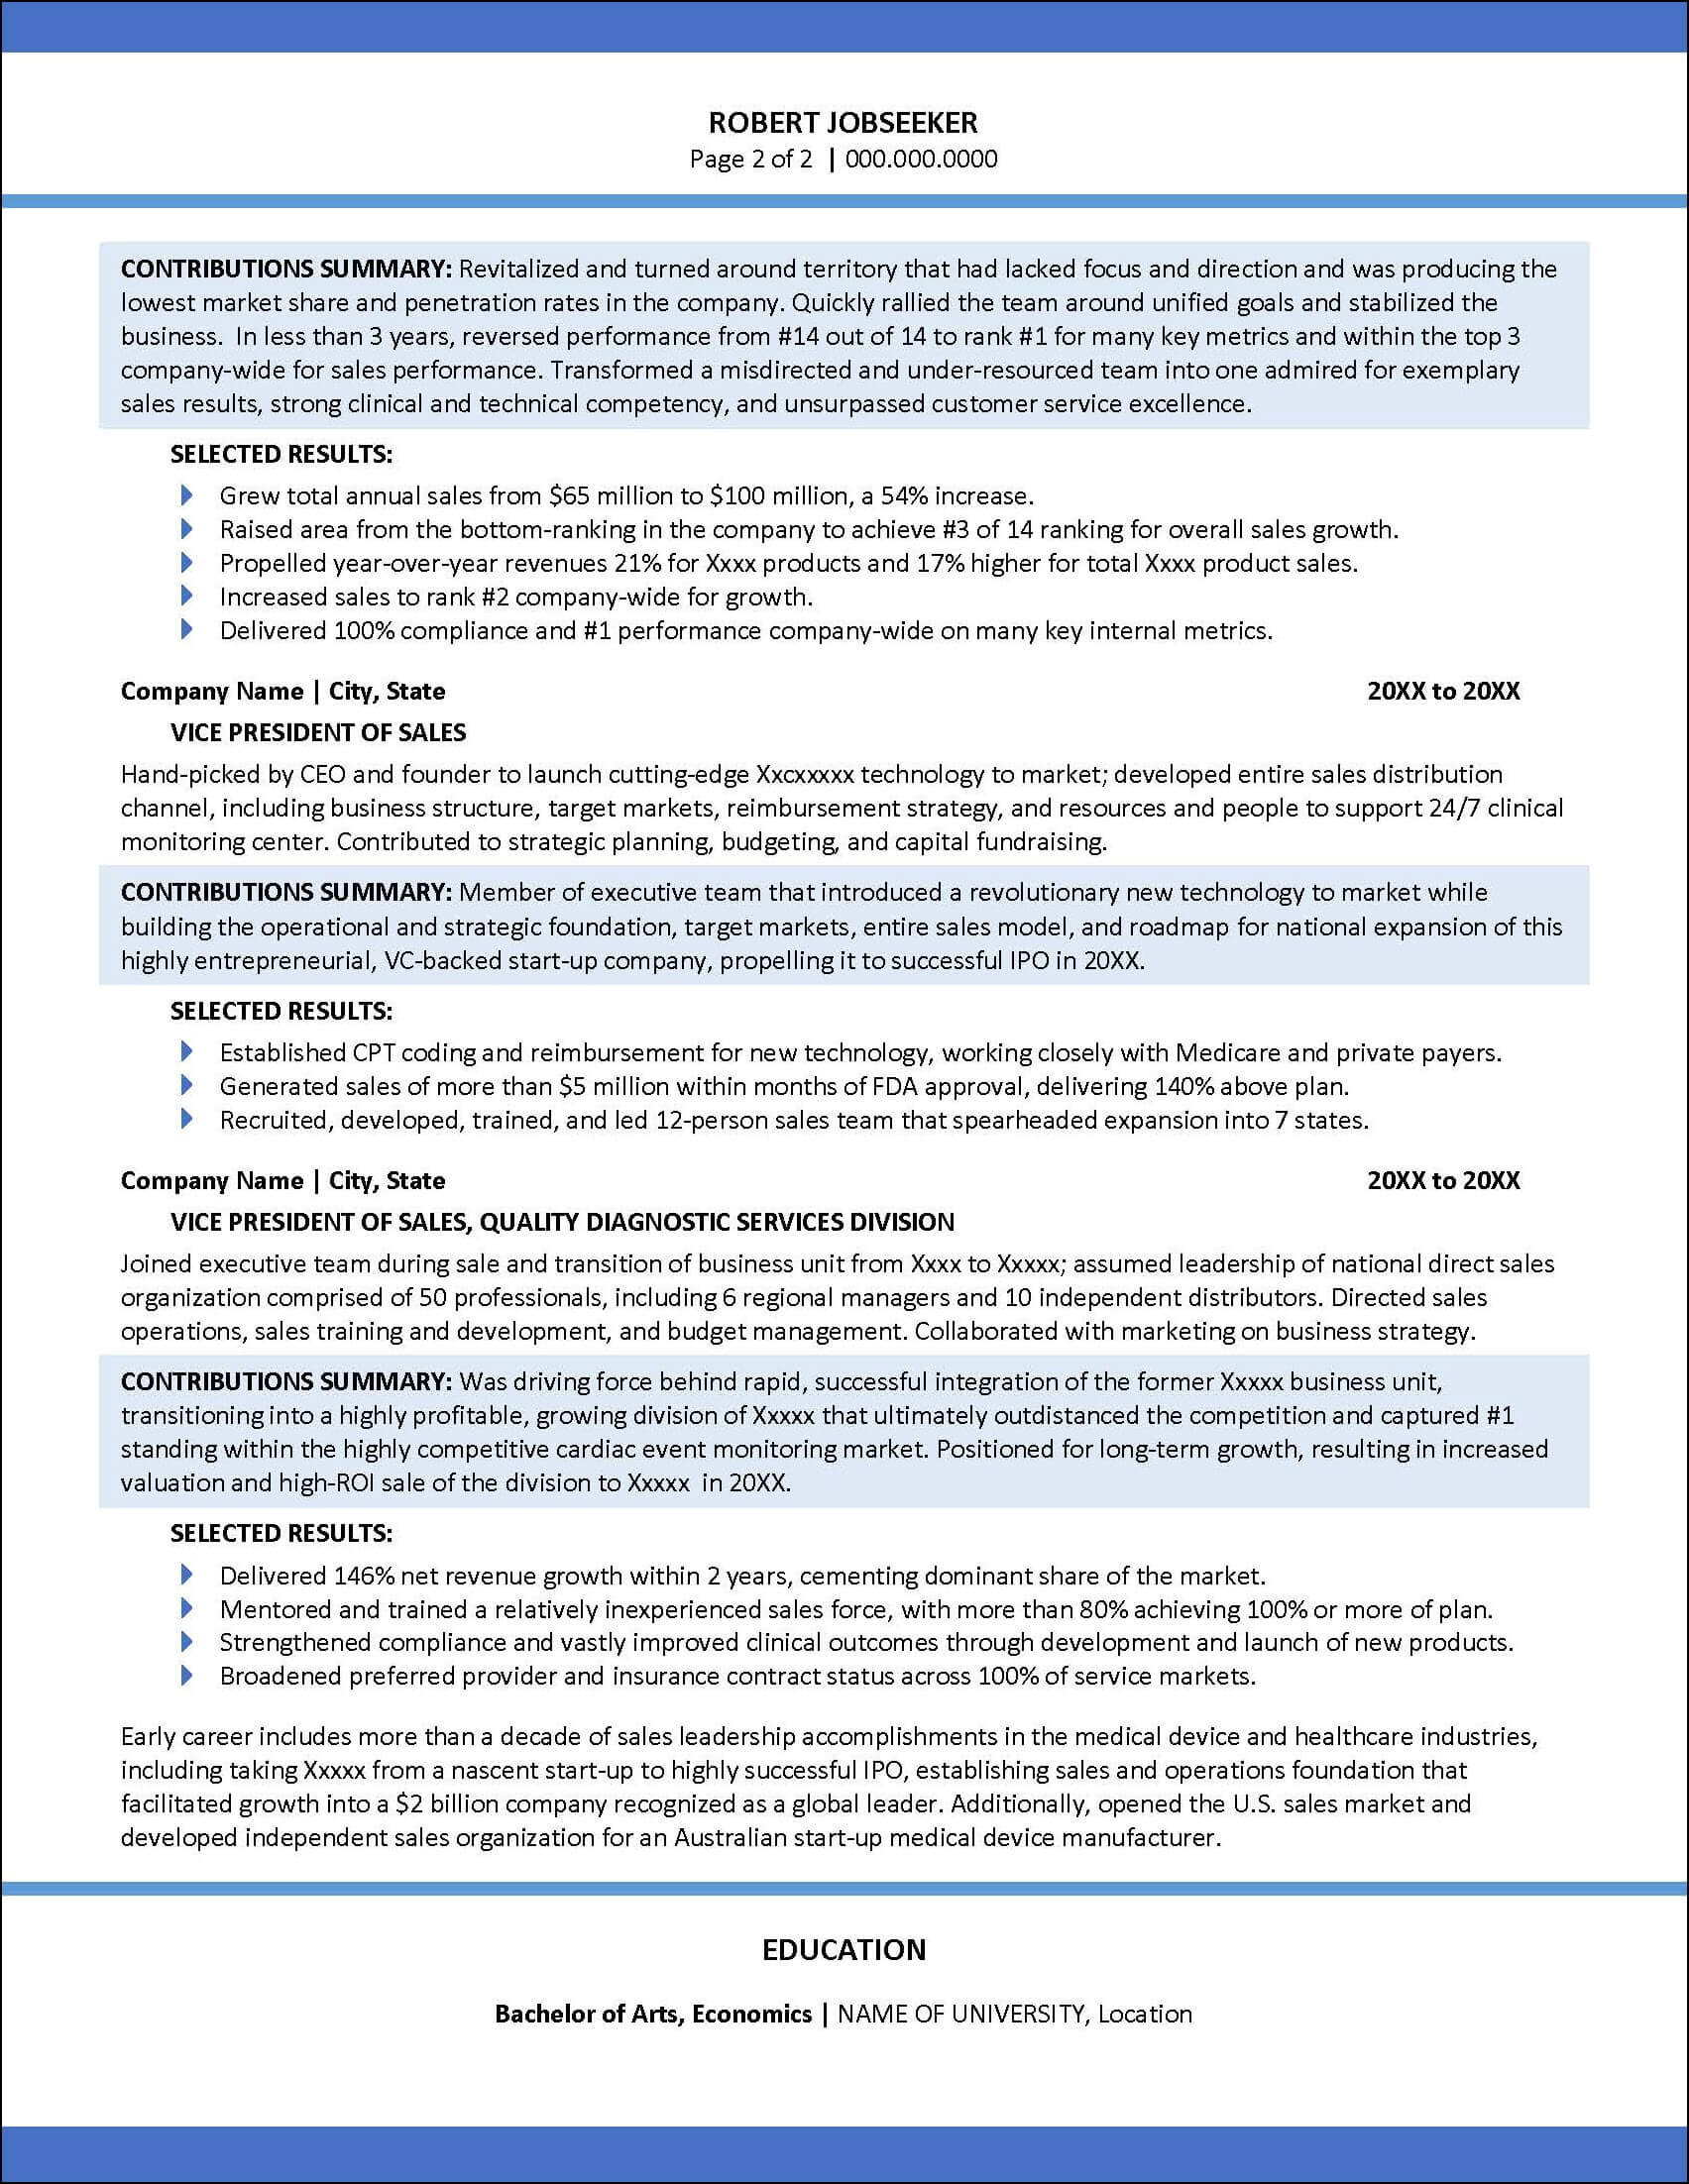 Example Resume Template with Accomplishments Page 2